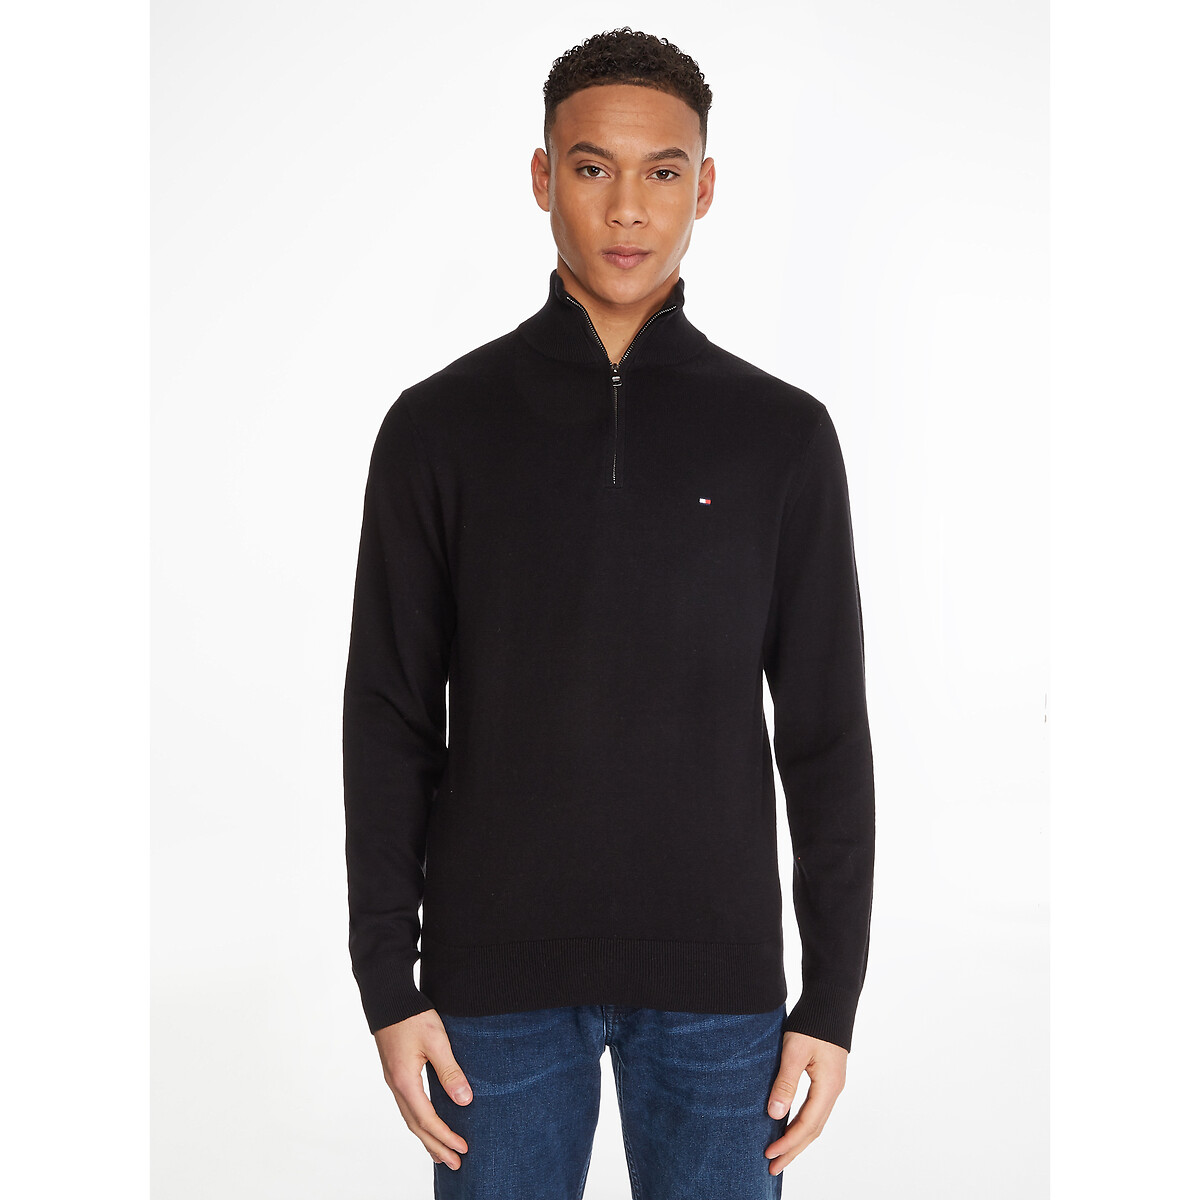 Embroidered Logo Jumper in Cotton/Cashmere with Half Zip